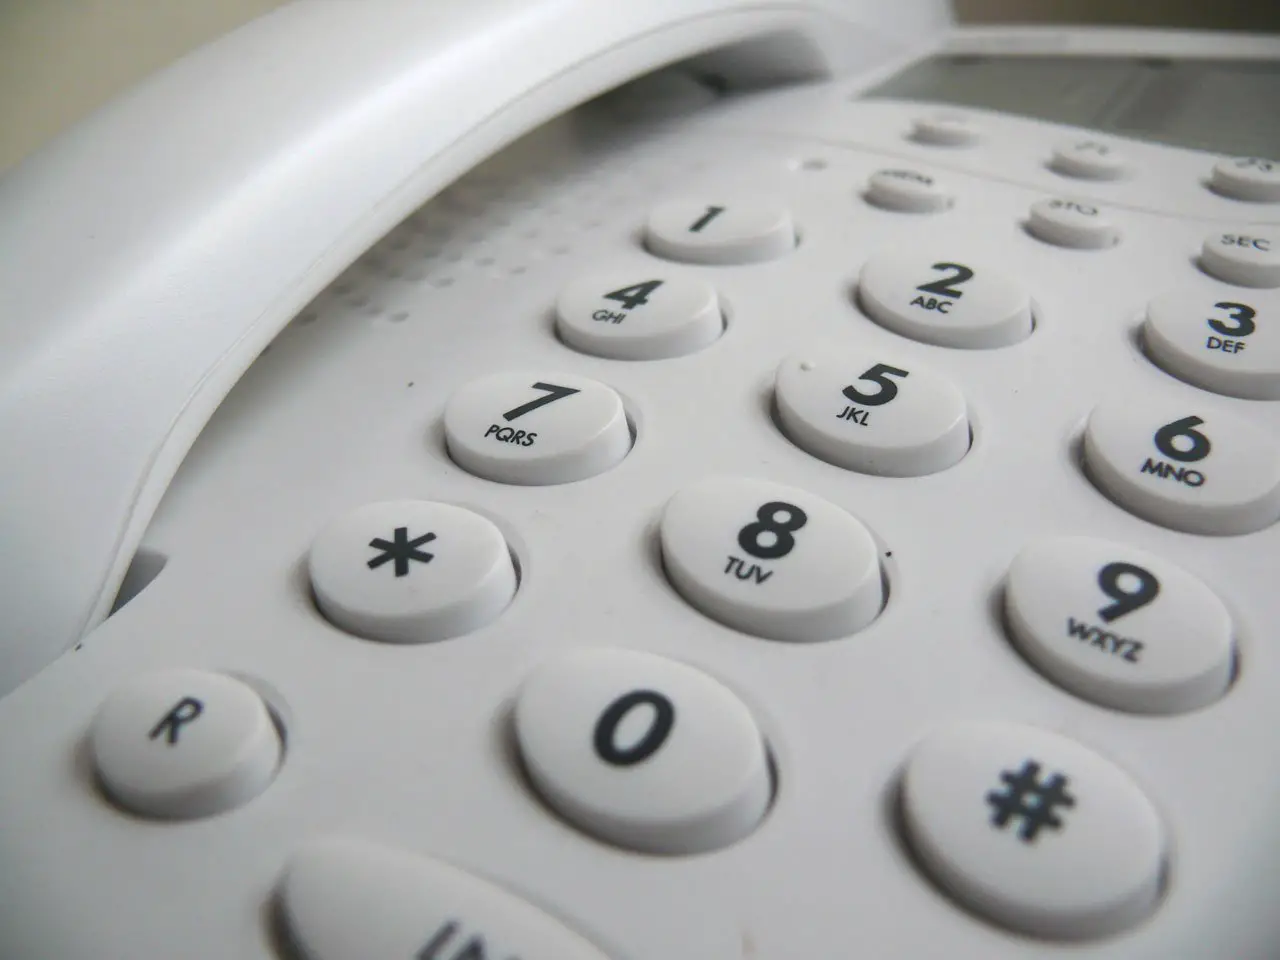 A Crisp VoIP Phone System Guide for Your Business